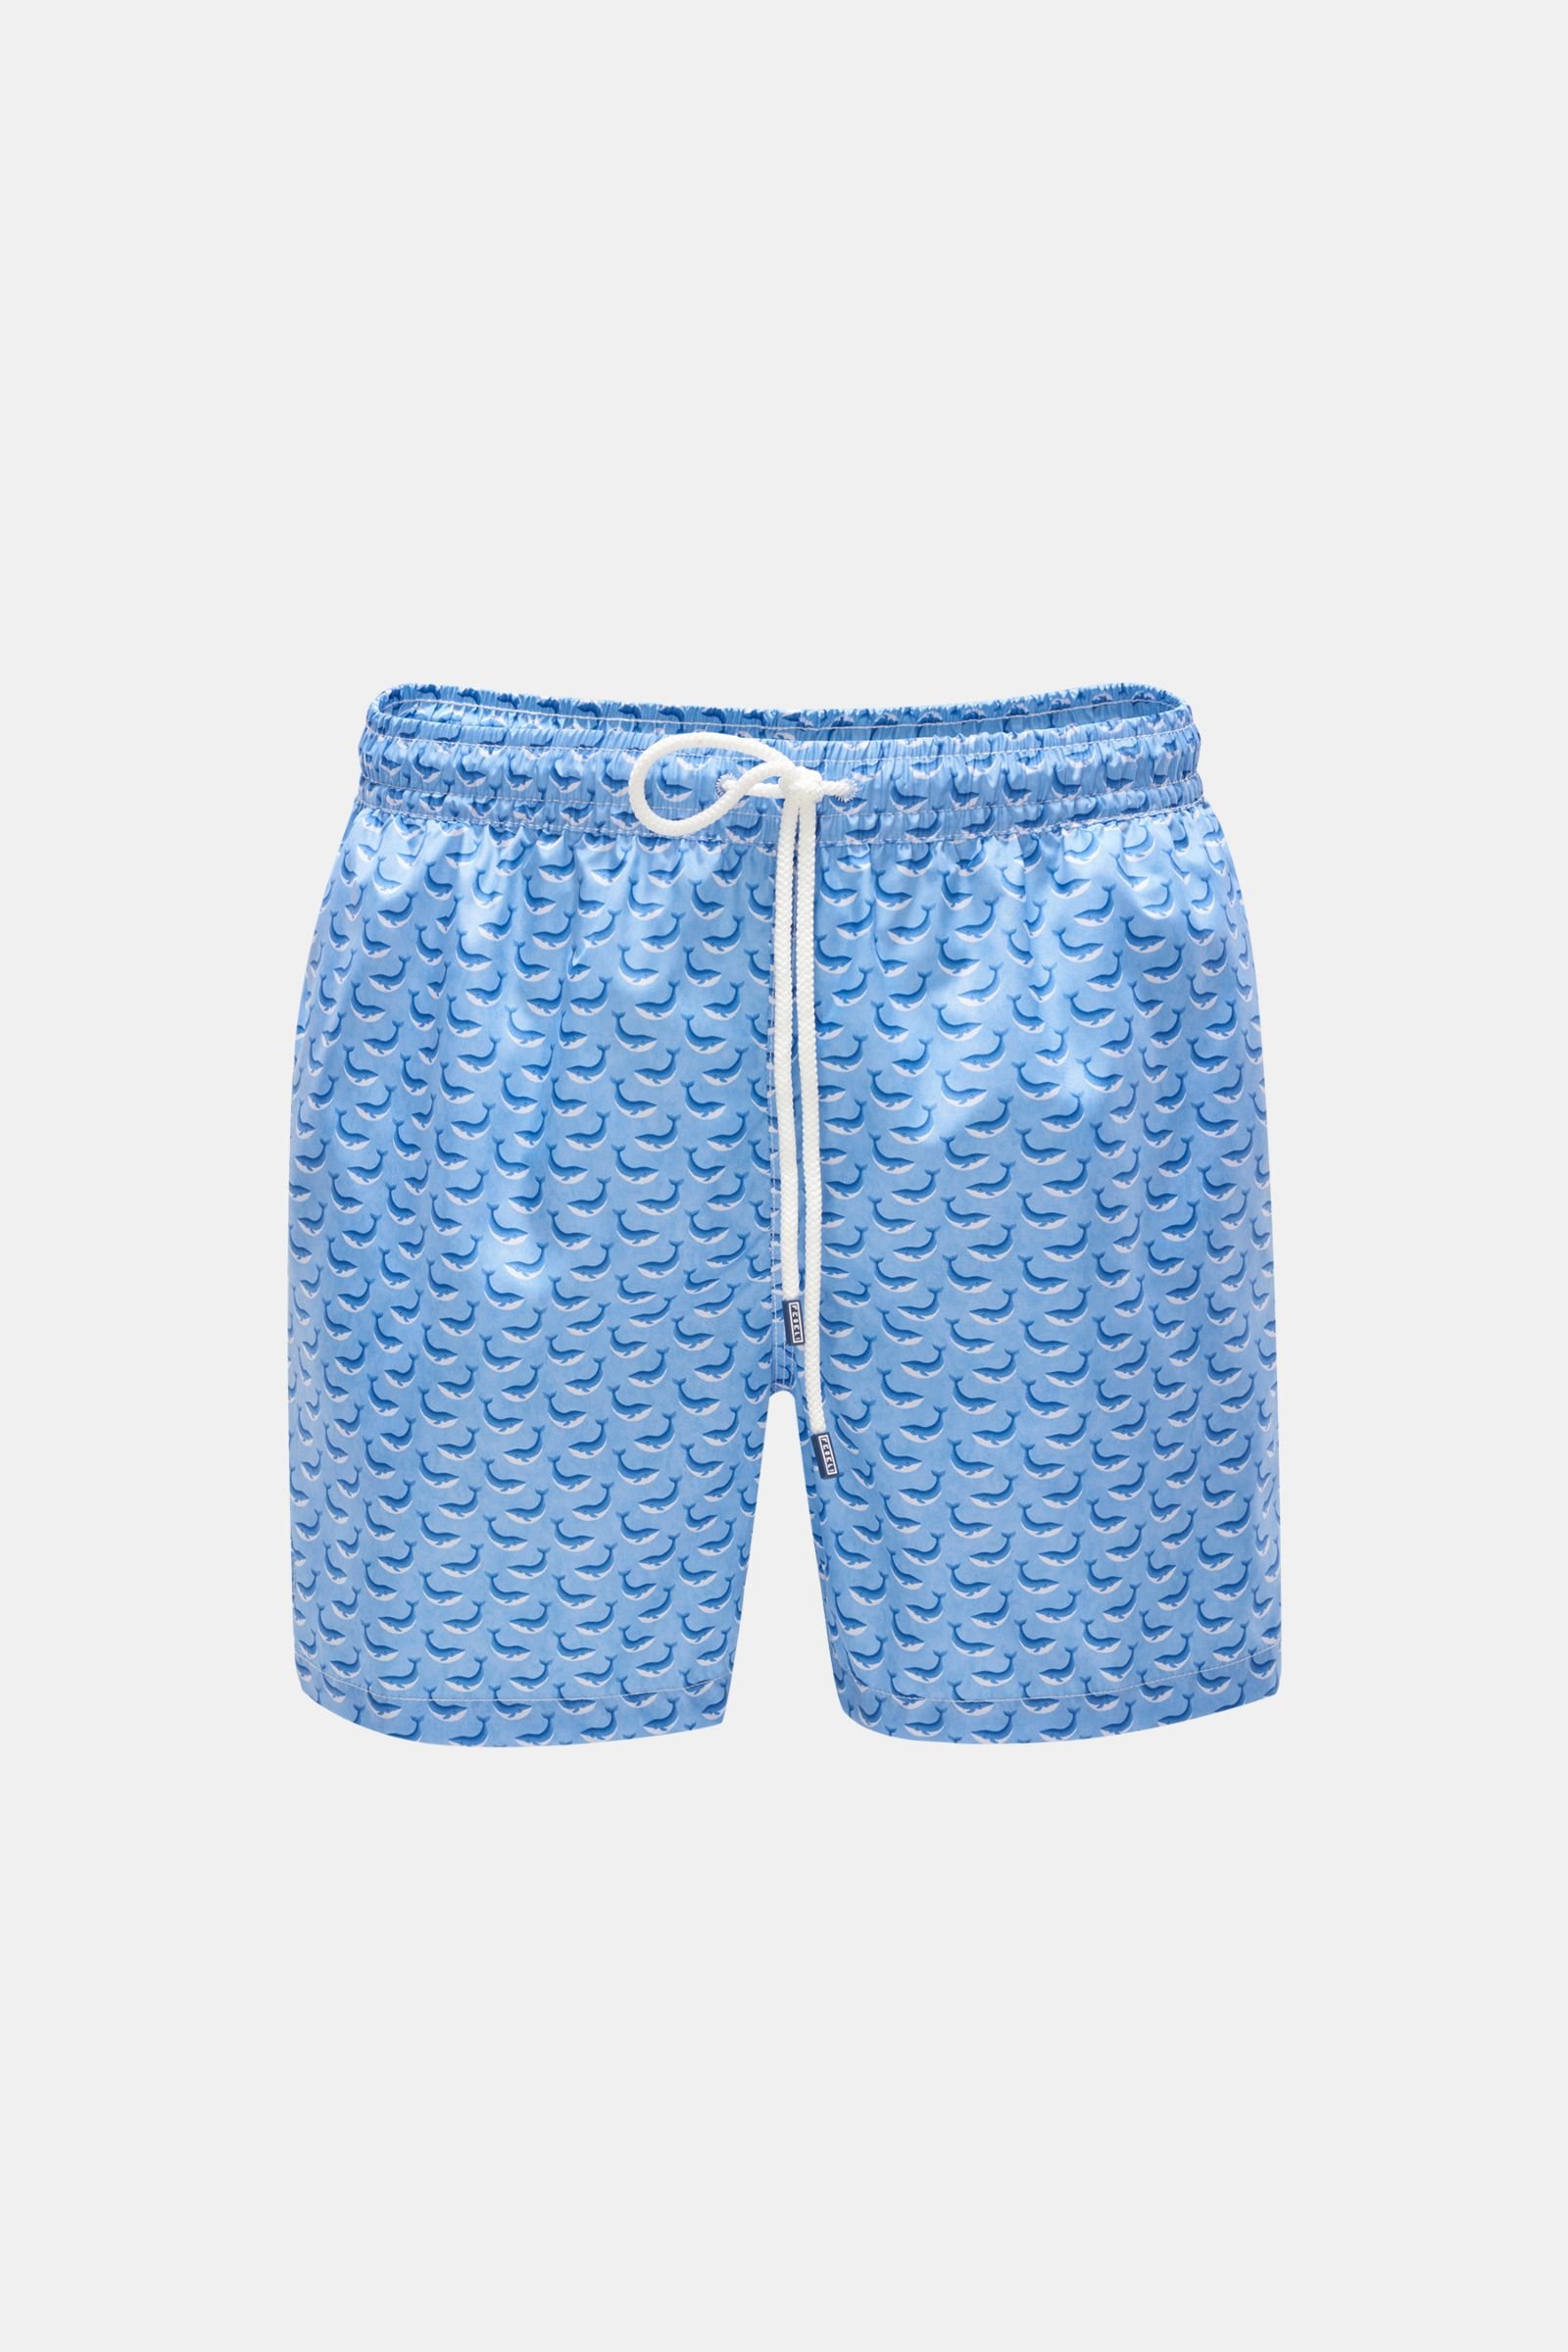 Swim shorts 'Madeira Airstop' smoky blue patterned